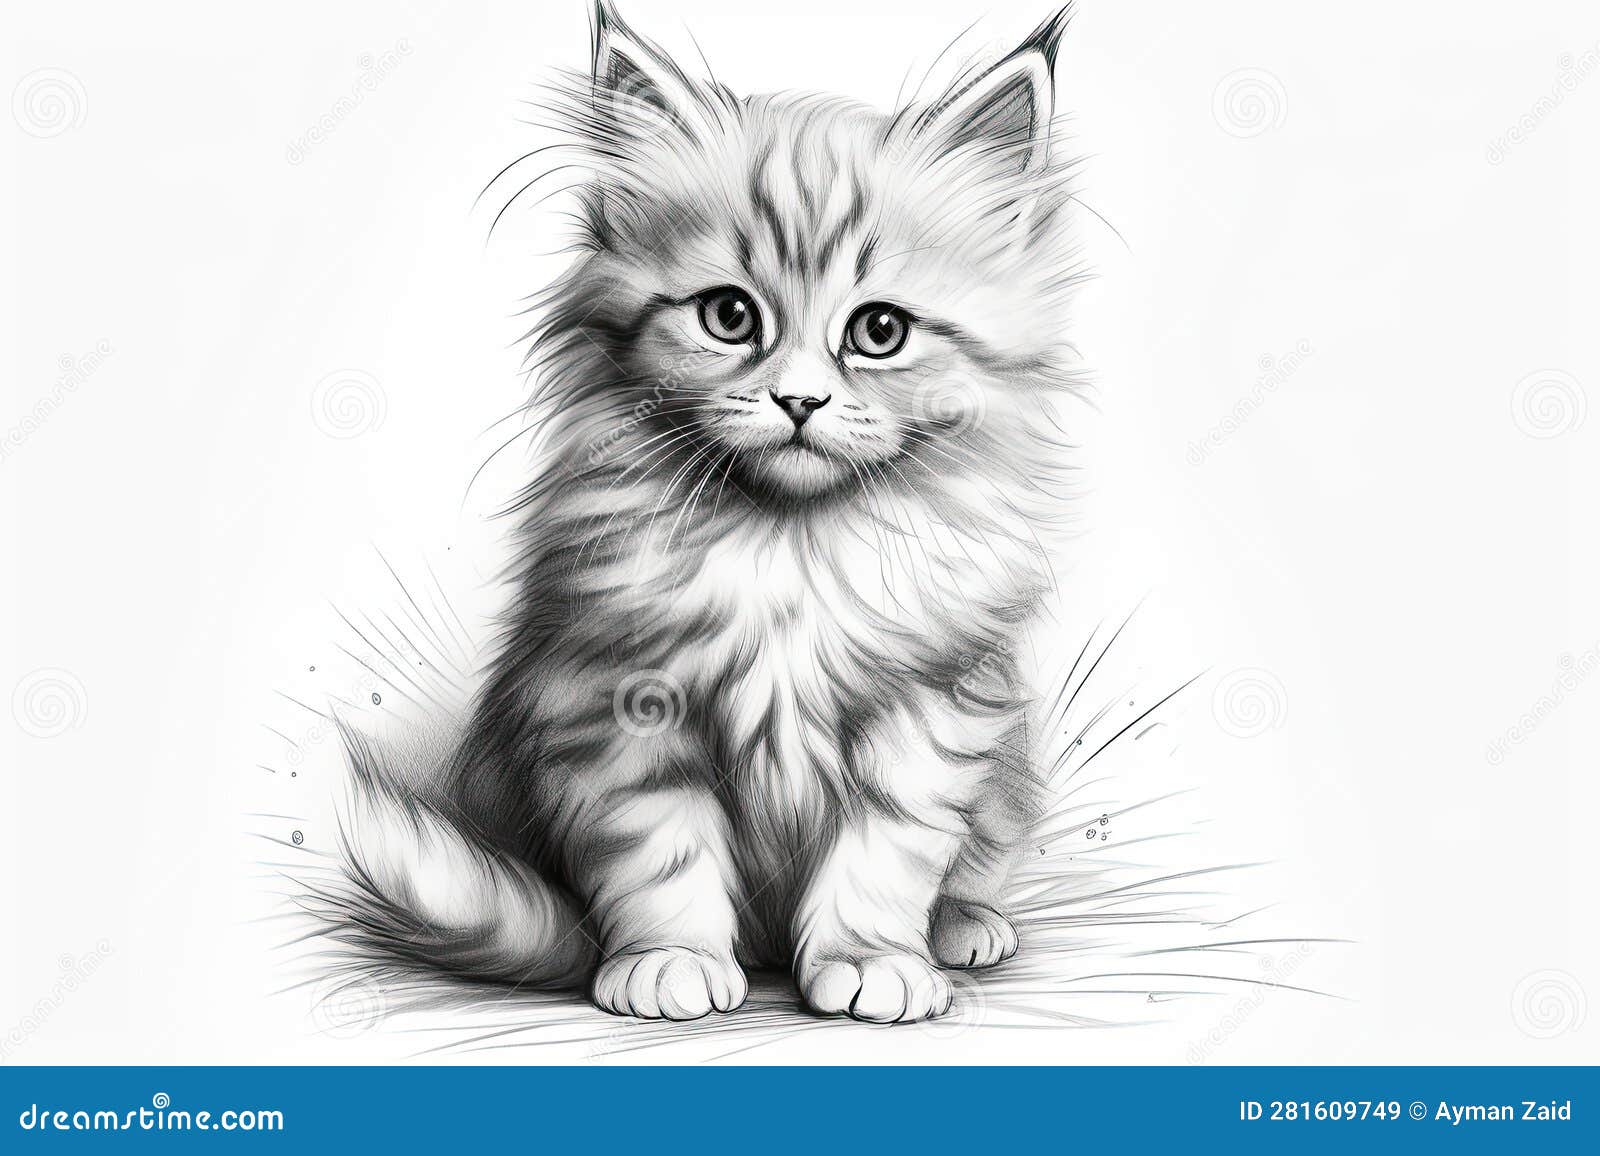 How to draw a cat (1) How to draw a basic face | MediBang Paint - the free  digital painting and manga creation software